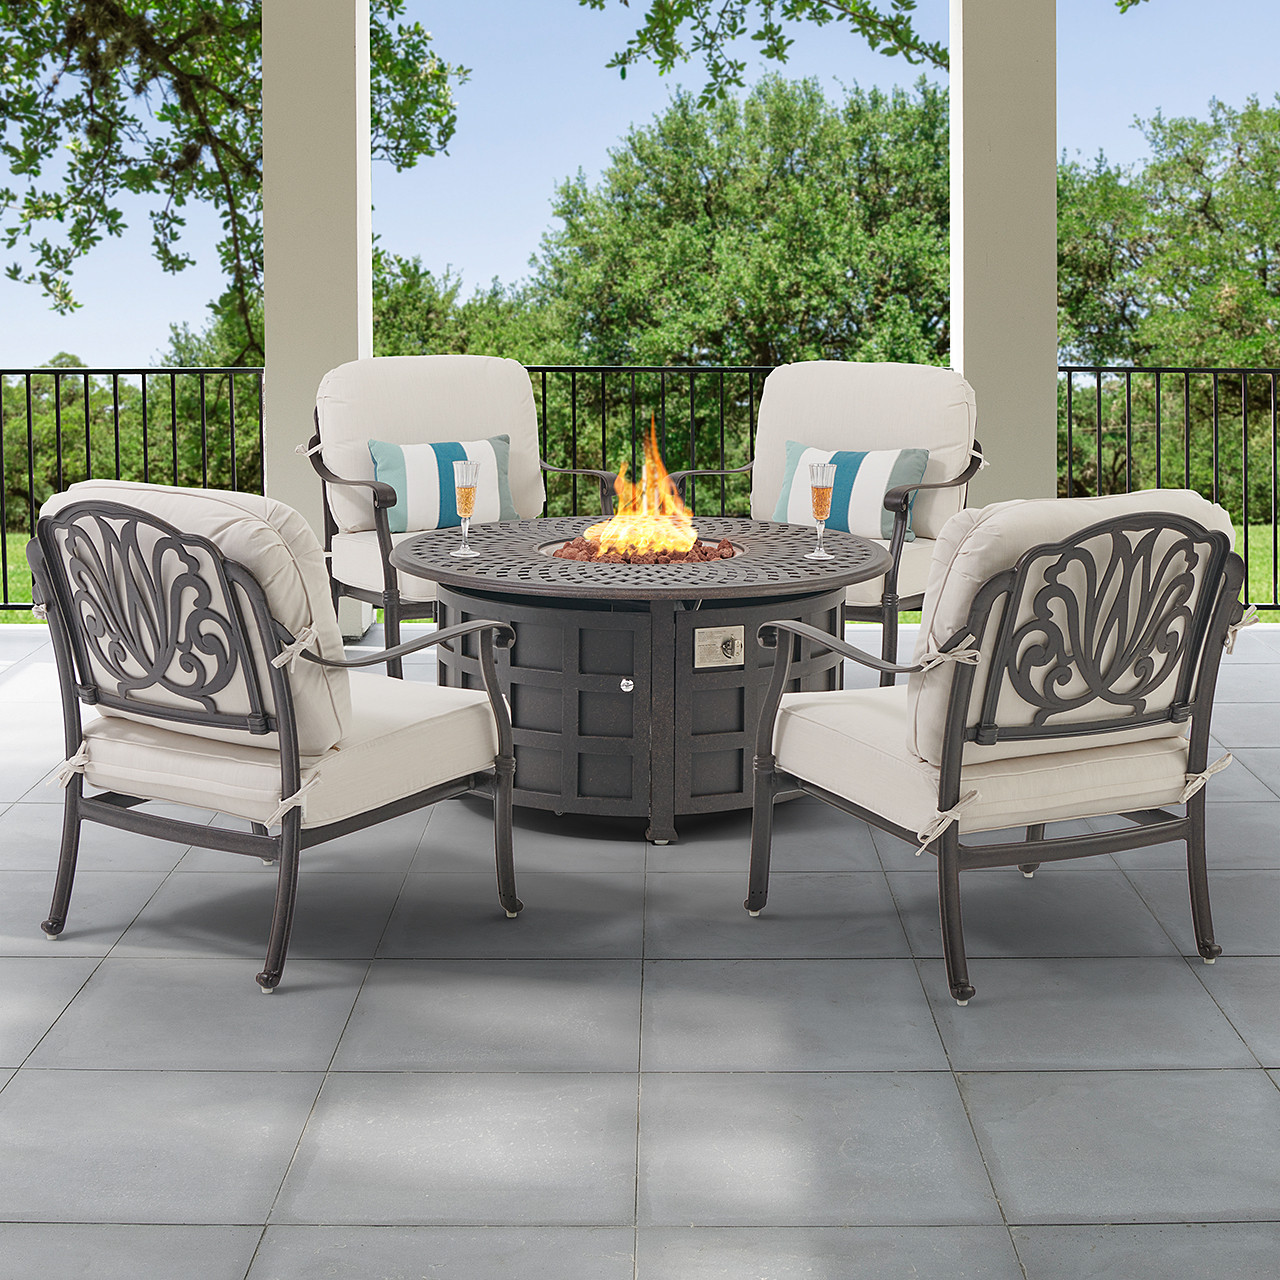 Cadiz Aged Bronze Cast Aluminum with Cushions 5 Piece Chat Group + 48 in. D LP Gas Fire Pit Table